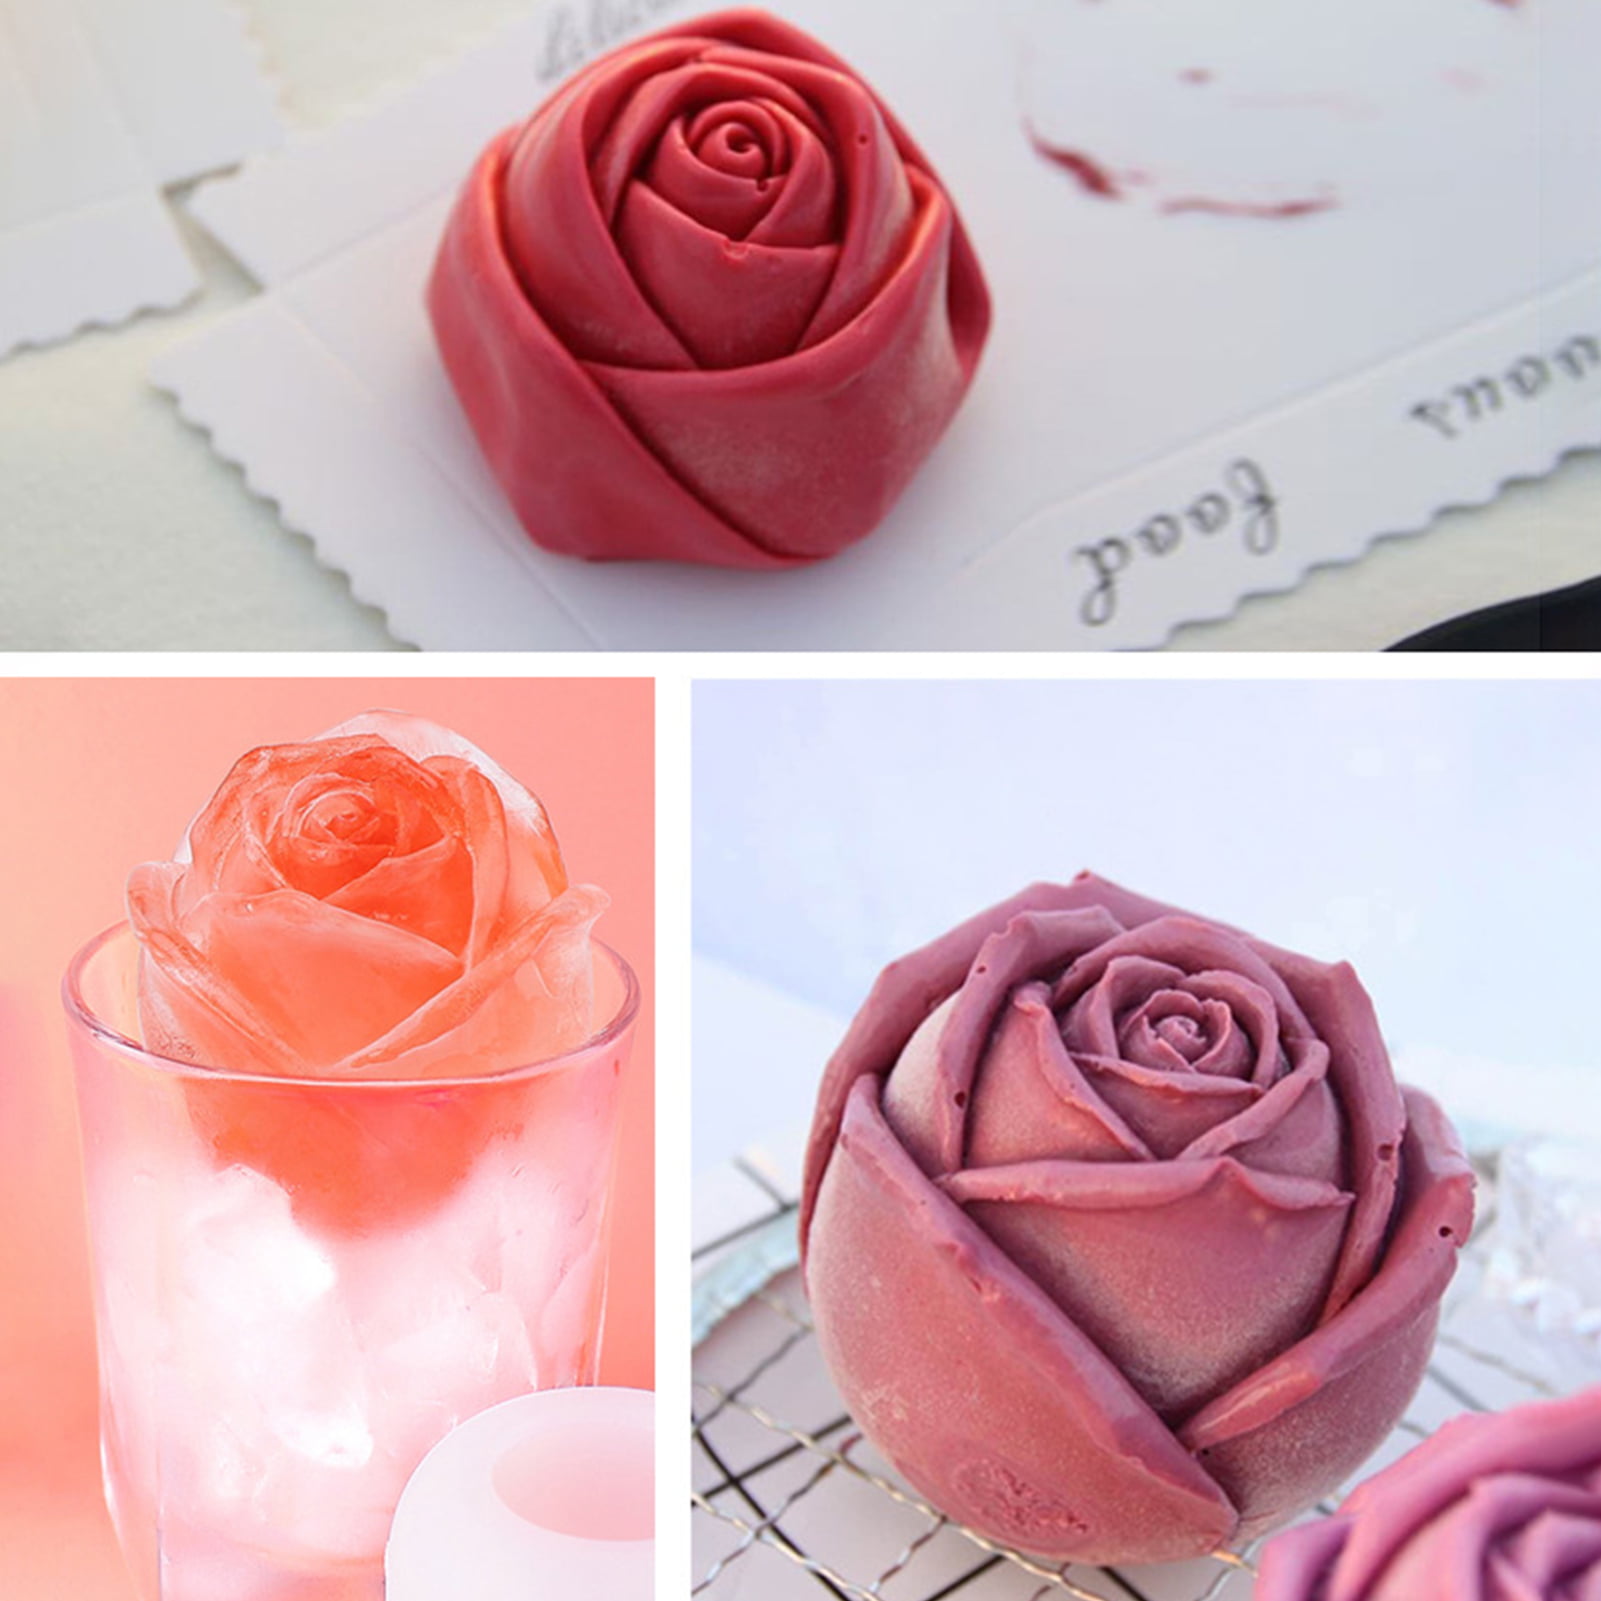 Rose silicone mold for fondant or chocolate or cake decoration L094 -  Silicone Molds Wholesale & Retail - Fondant, Soap, Candy, DIY Cake Molds